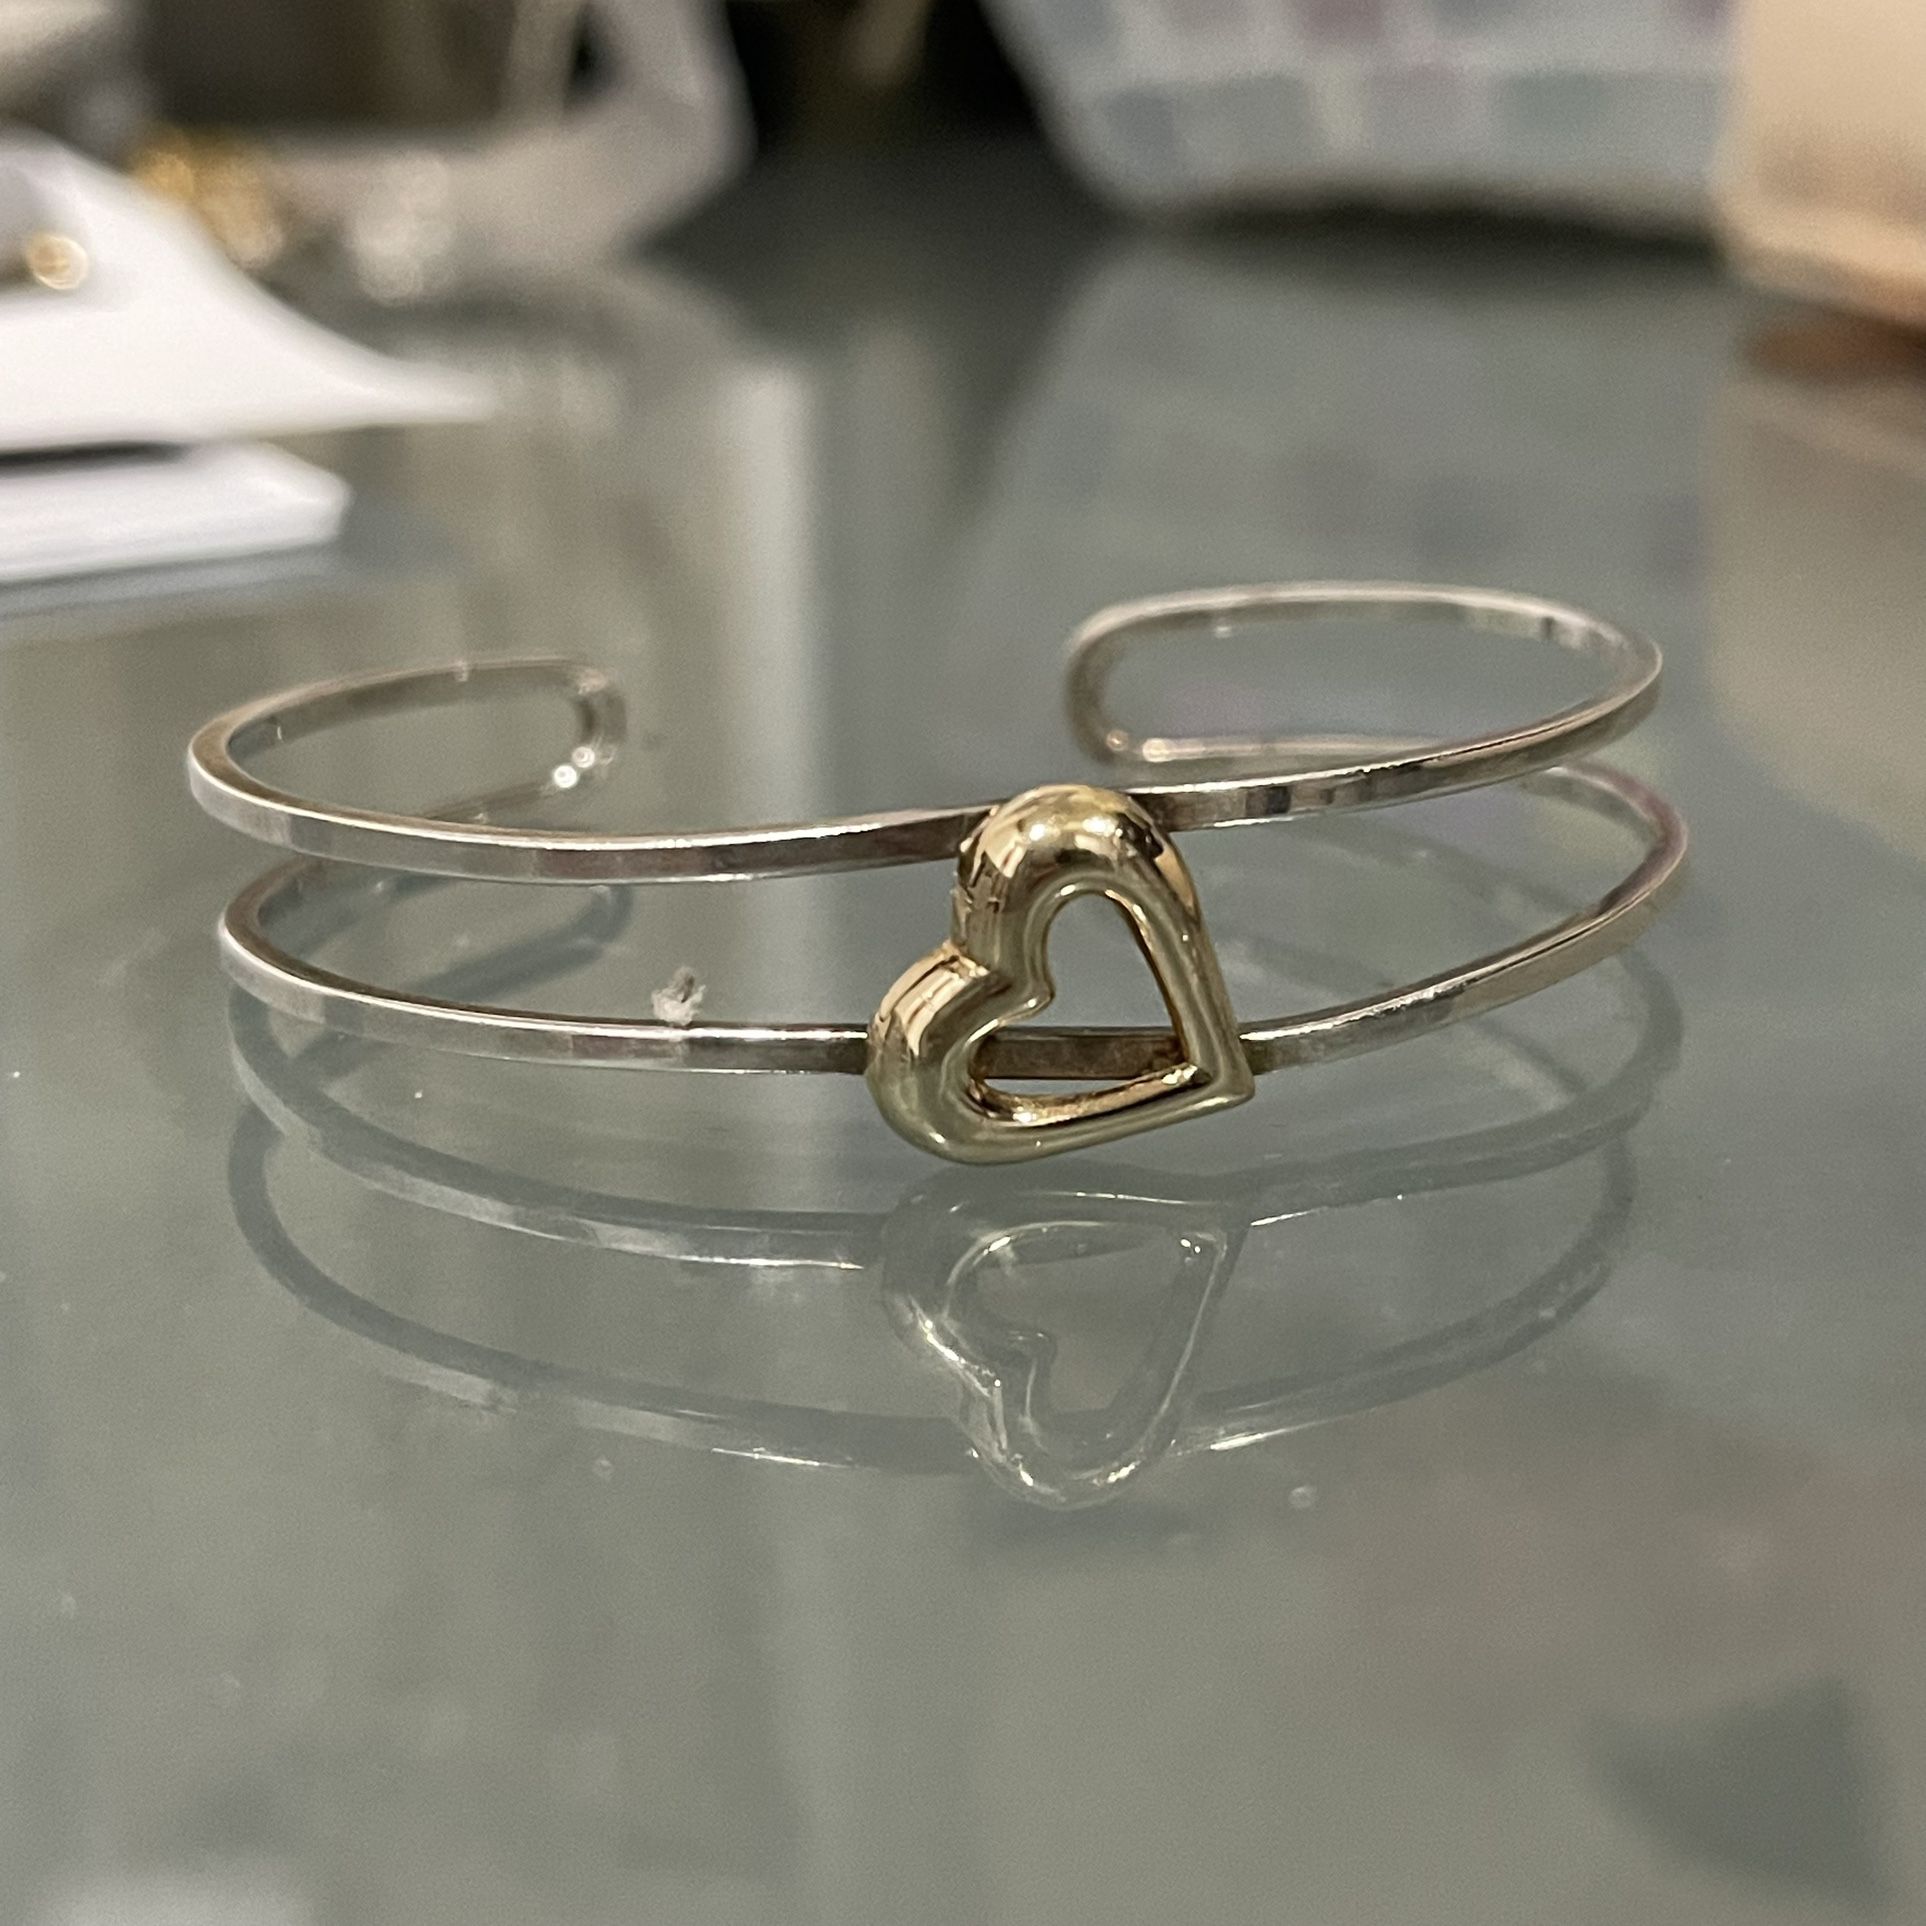 14k gold heart and 925 sterling silver cuff bracelet